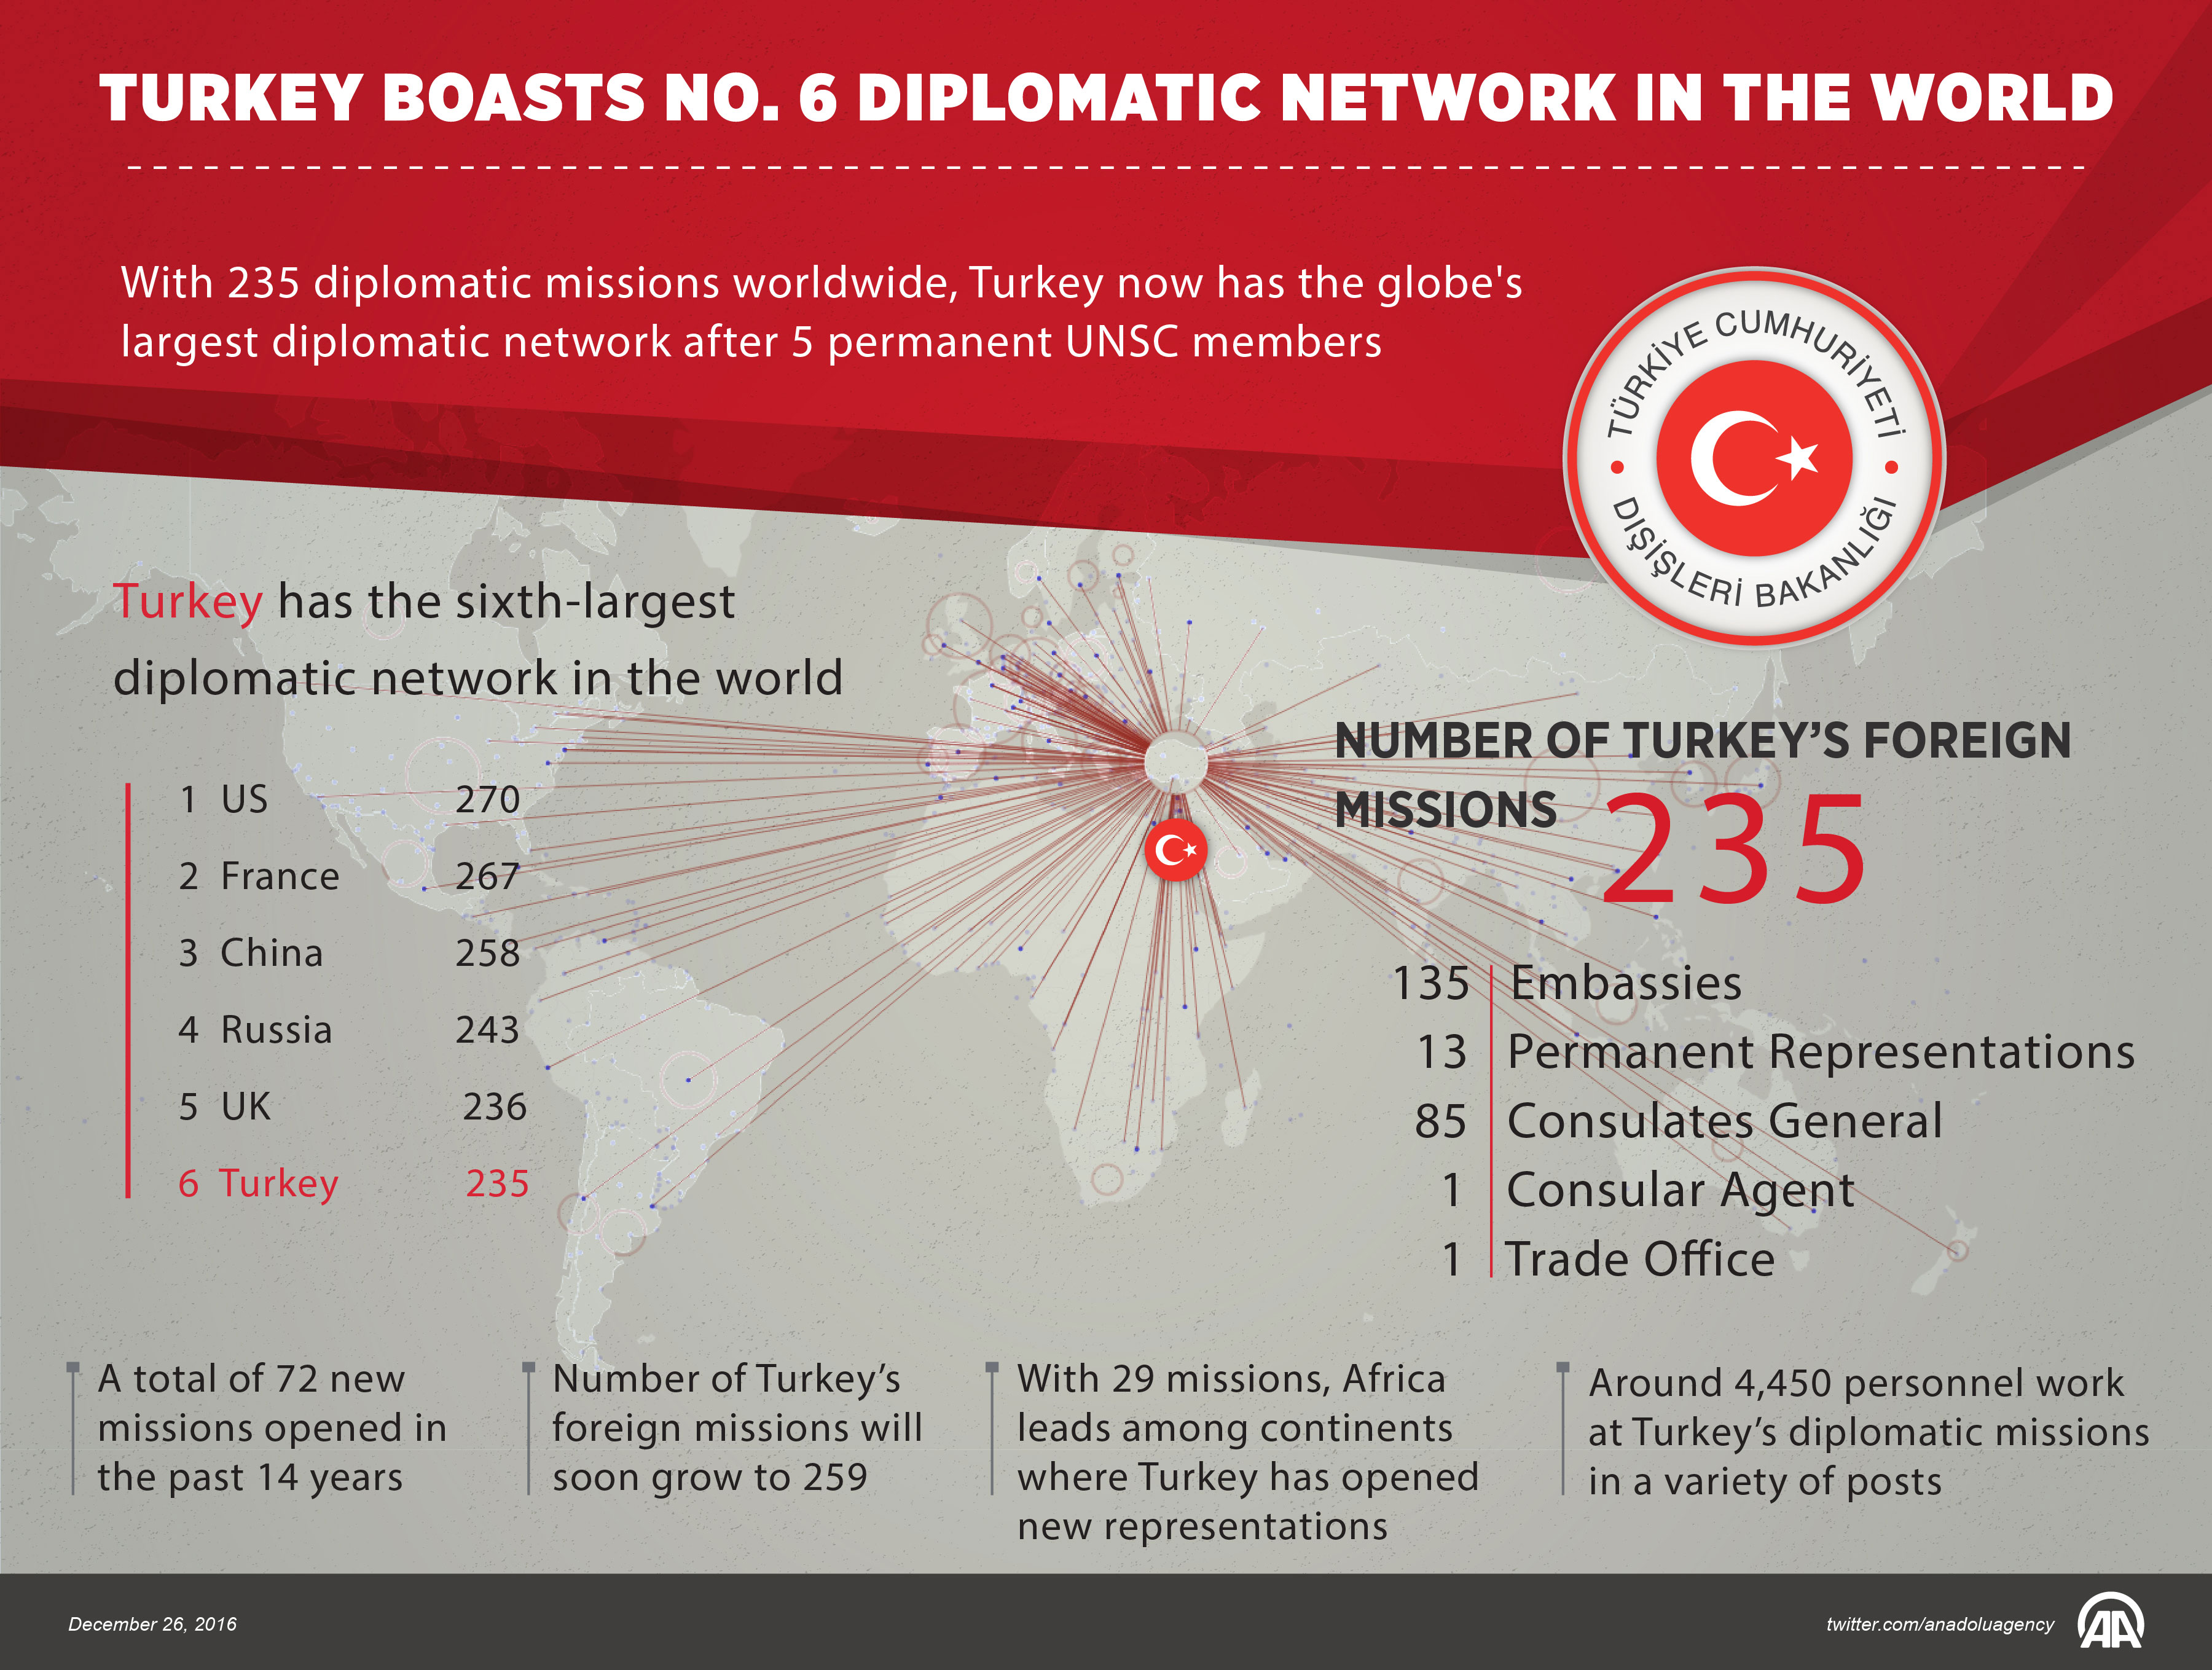 Turkey boasts no. 6 diplomatic network in the world